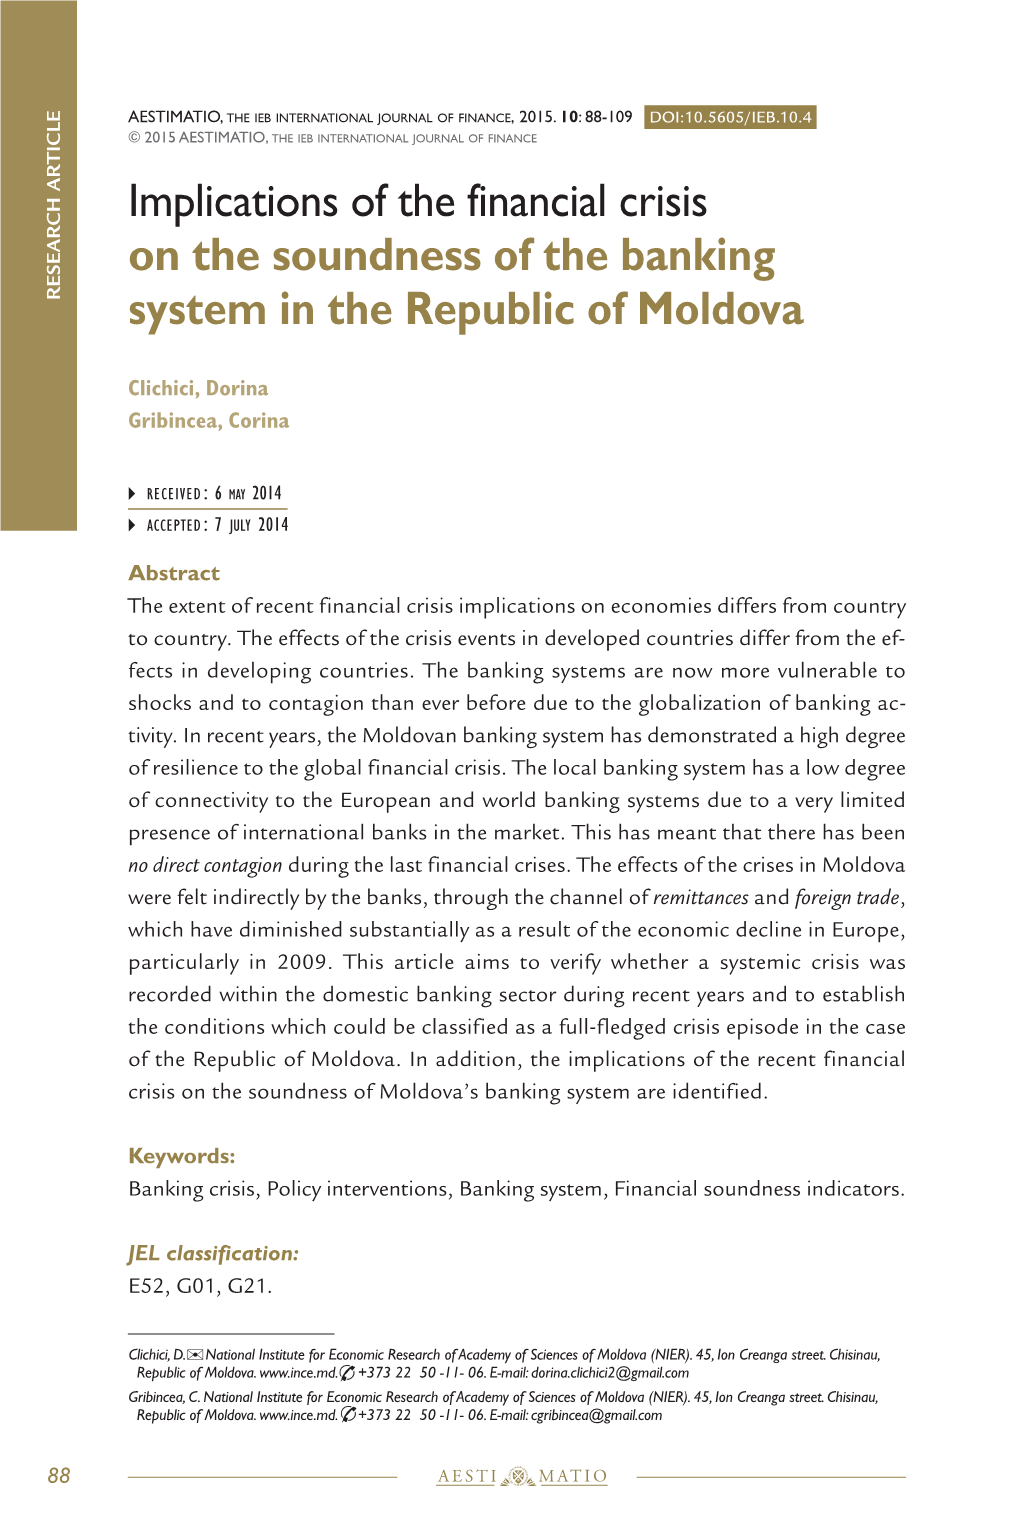 Implications of the Financial Crisis on the Soundness of the Banking System in the Republic of Moldova